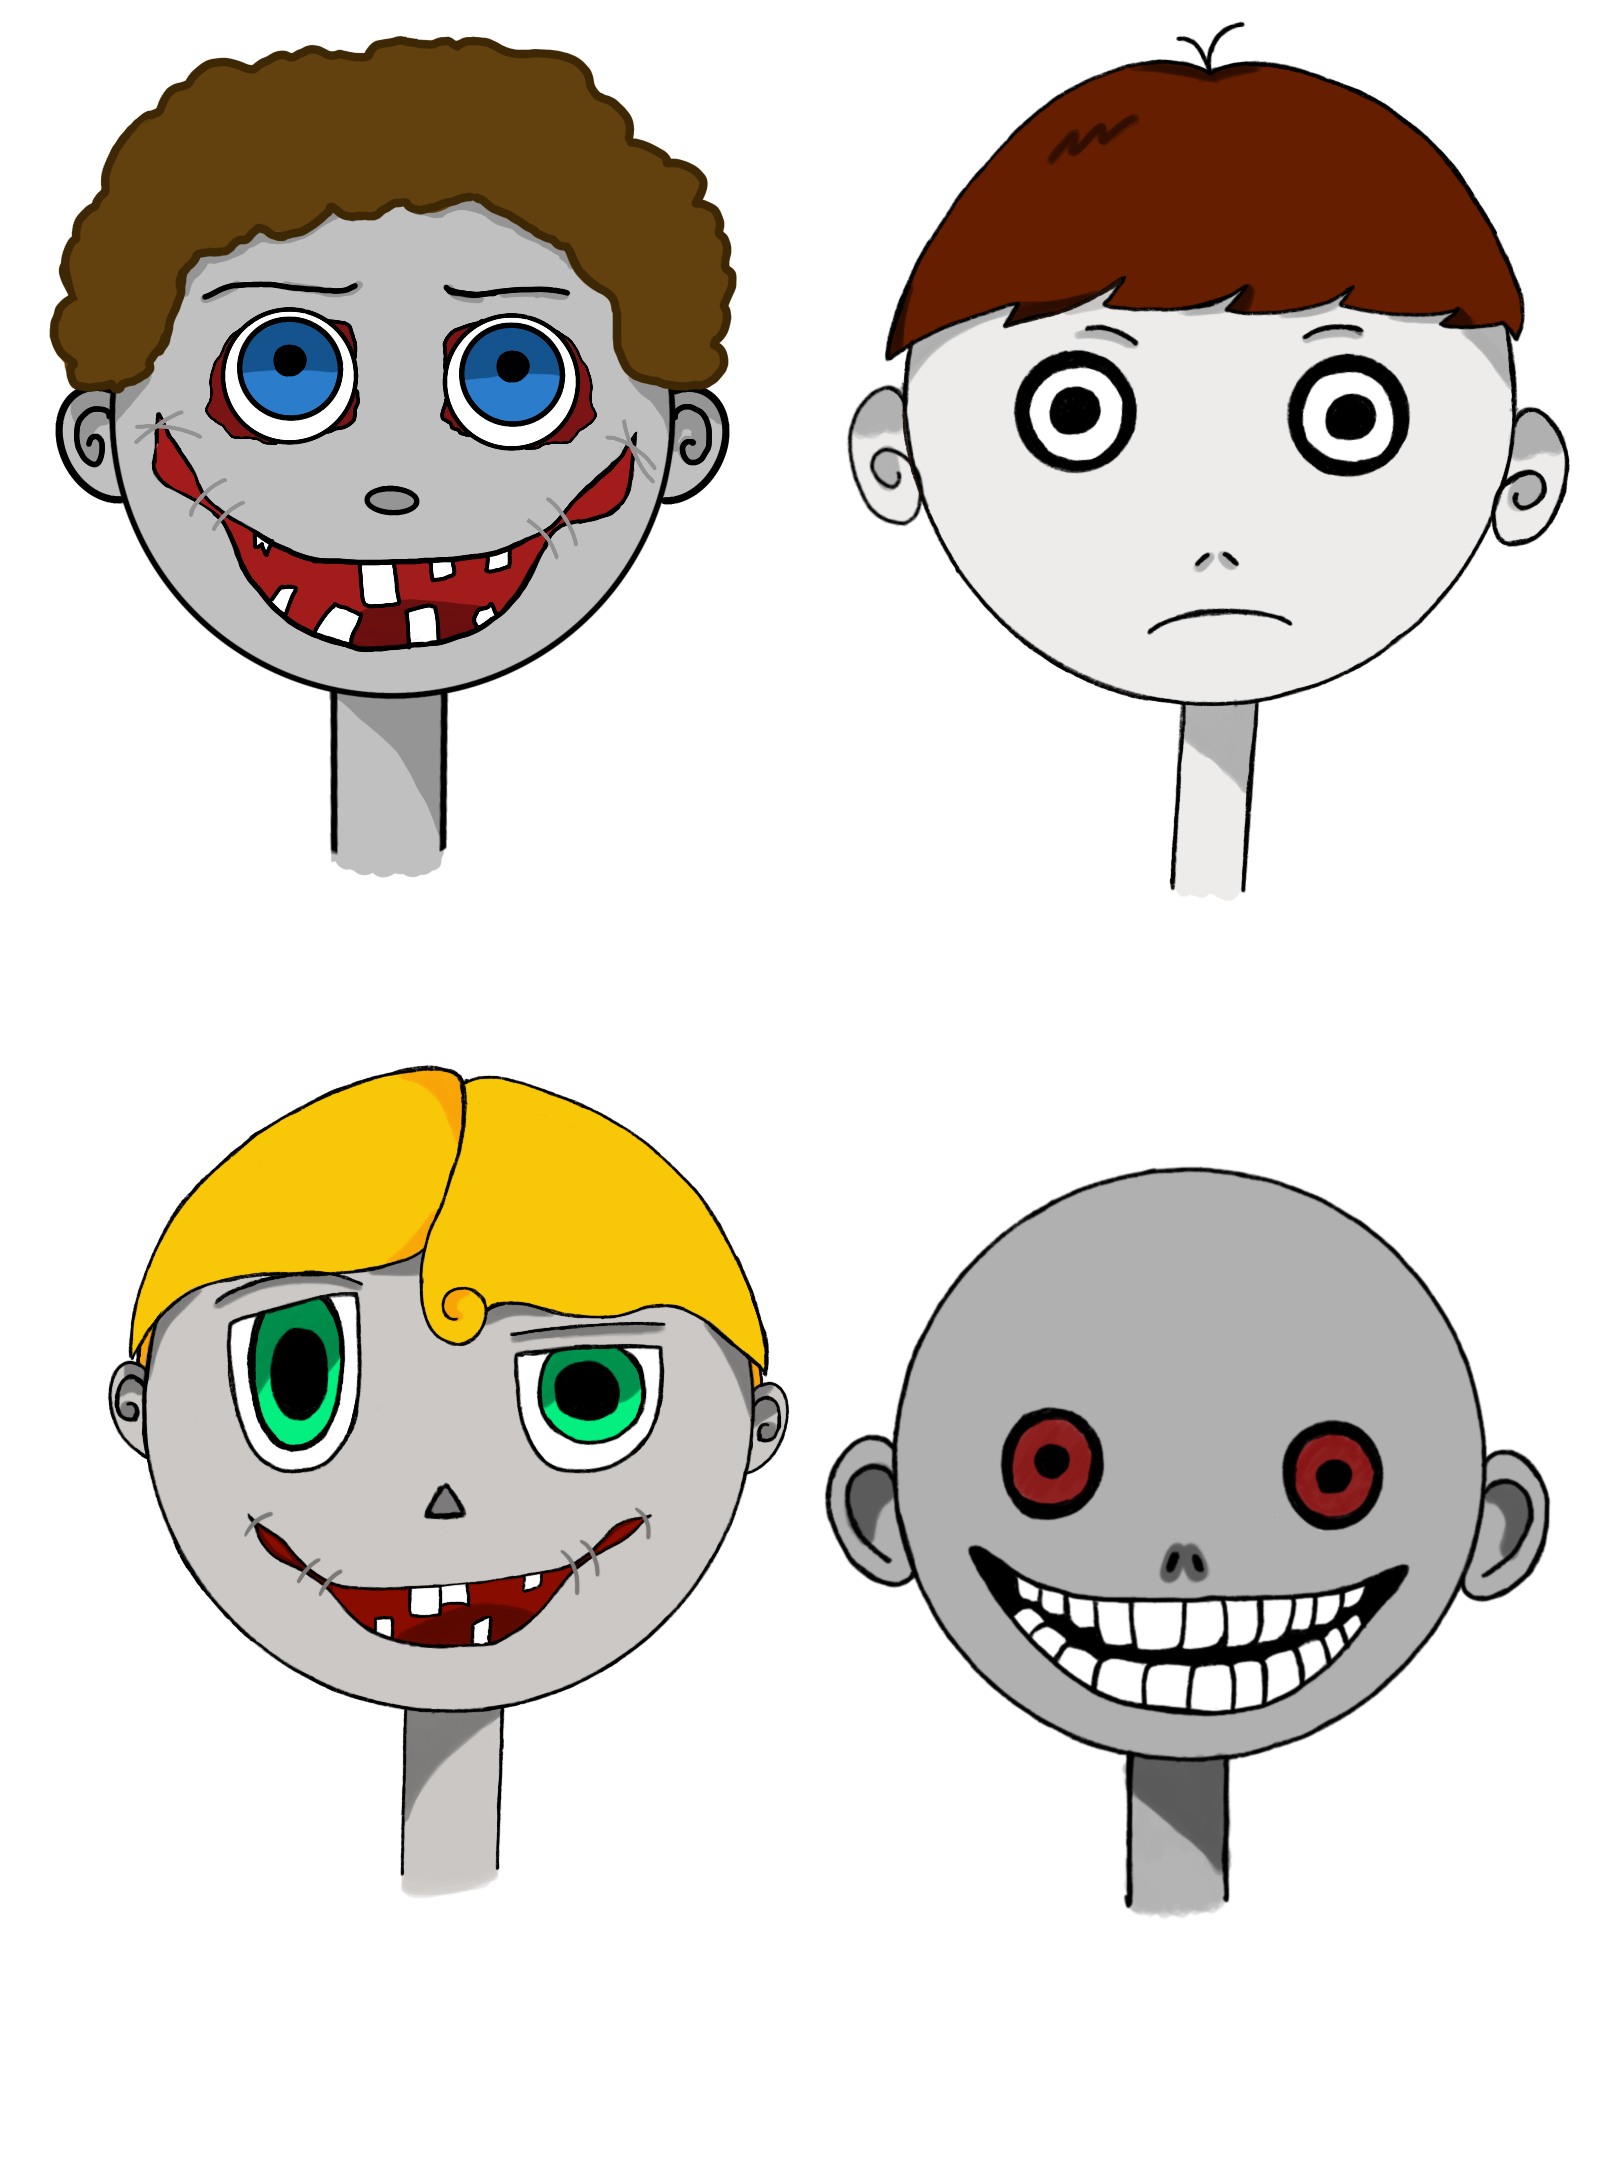 BA Games Art and design horror project by Lucy Saskia showing four final NPC designs with most of the characters smiling unwillingly.